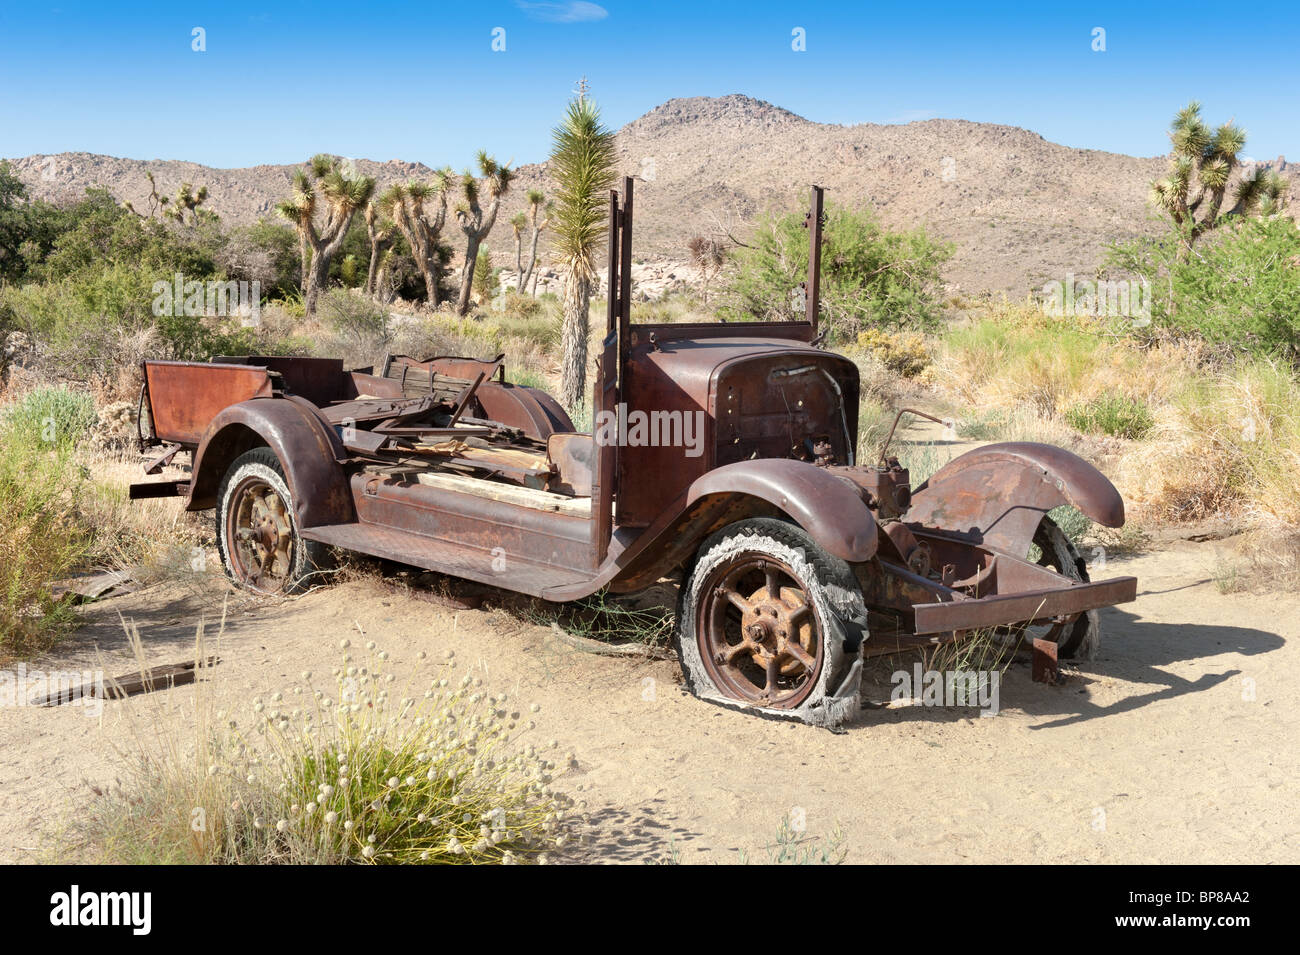 An old antique car left abandoned in the desert Stock Photo